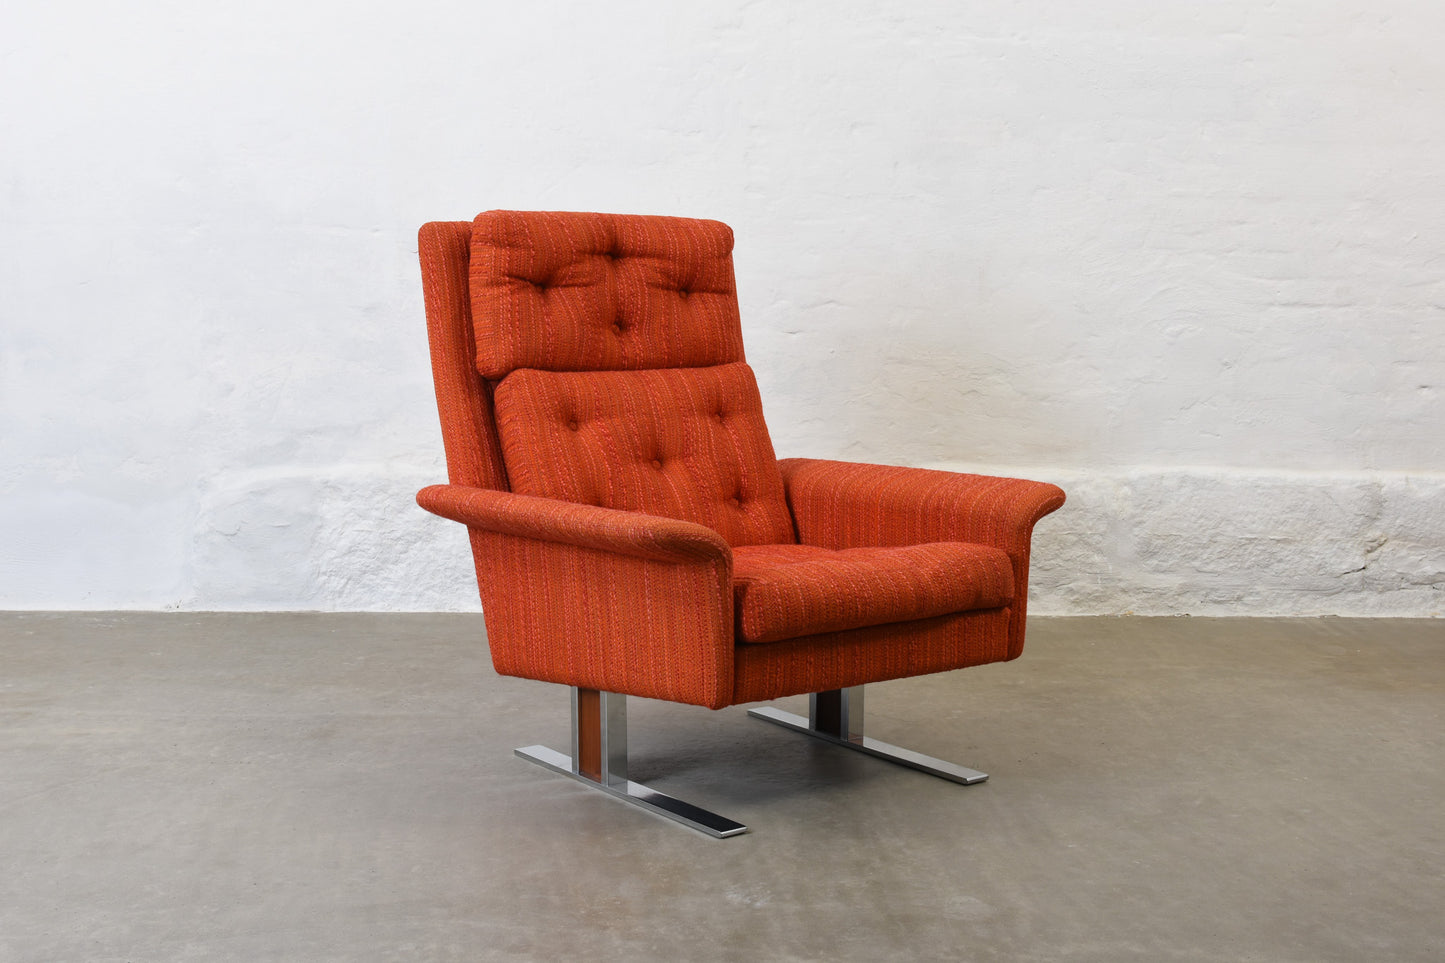 1960s high back lounger by Johannes Andersen